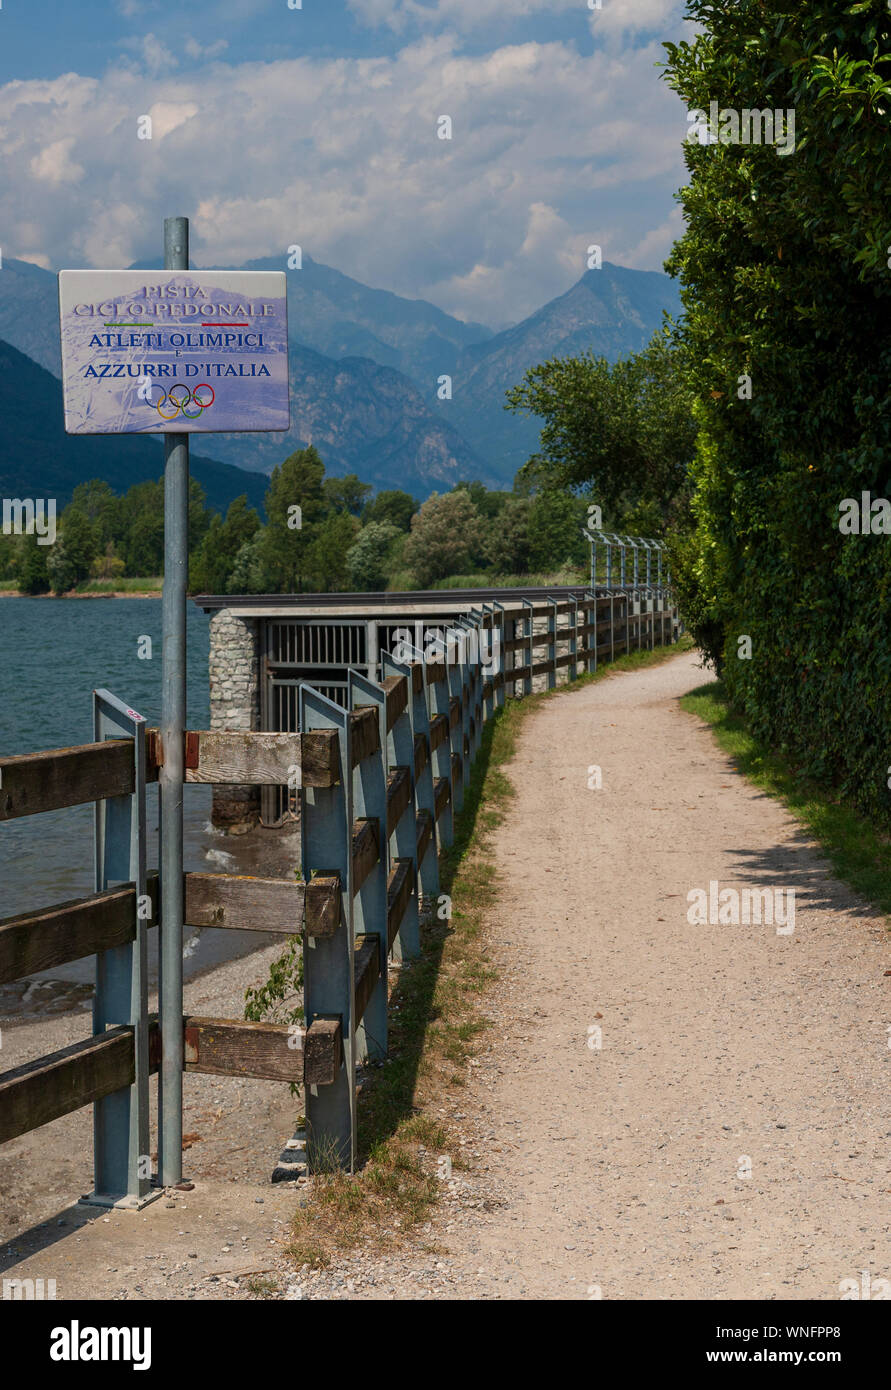 Lake Como, Italy - July 21, 2019. Bicycle and walking path sign - Olympic and Italian athletes from Italy - and a path. Alp mountains and path on Stock Photo